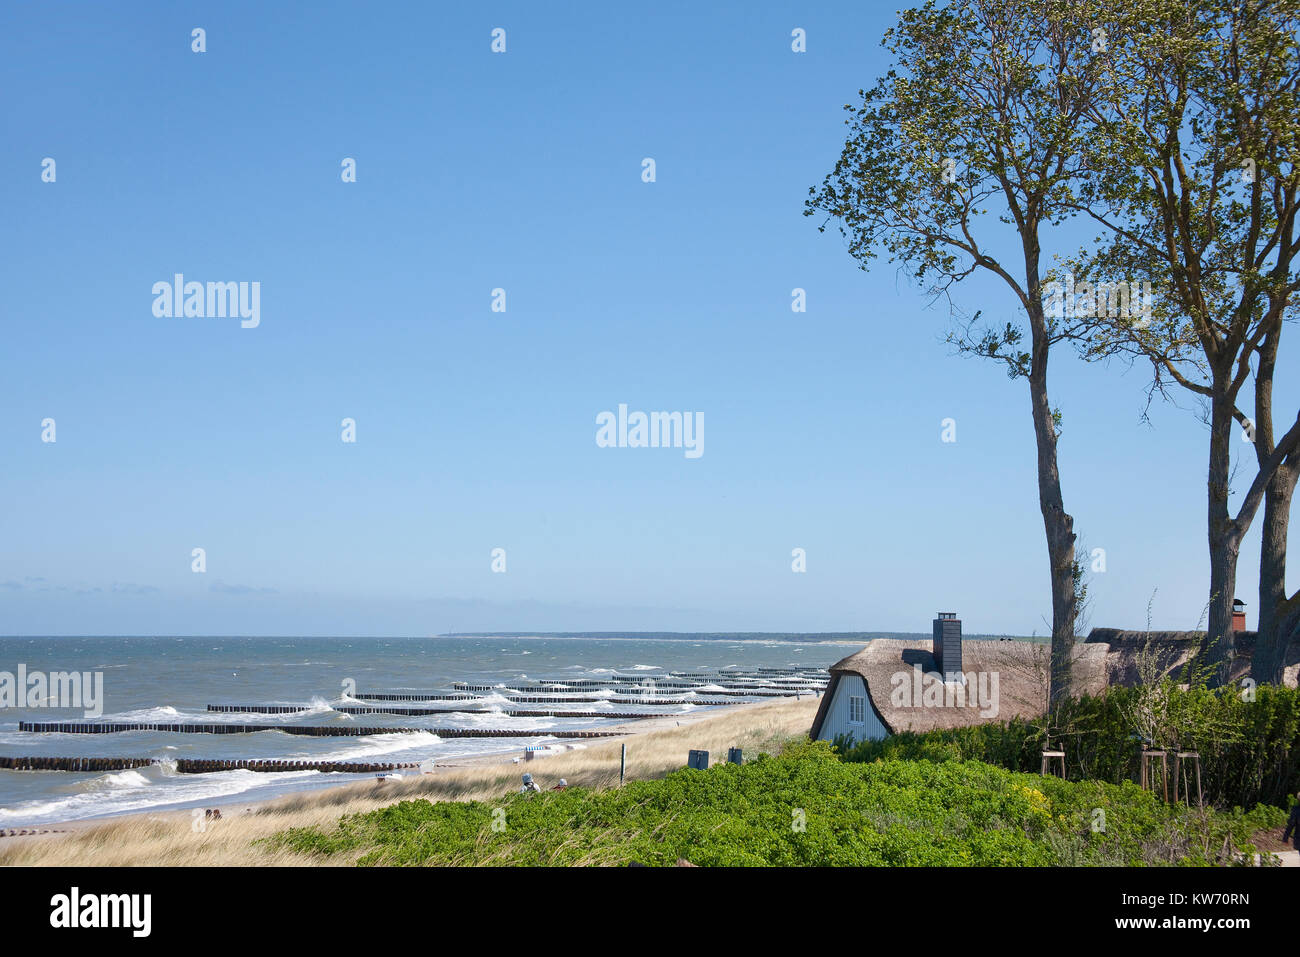 Thatched-roof house at 'Hohes Ufer', coast of Ahrenshoop, Fishland, Mecklenburg-Western Pomerania, Baltic Sea, Germany, Europe Stock Photo